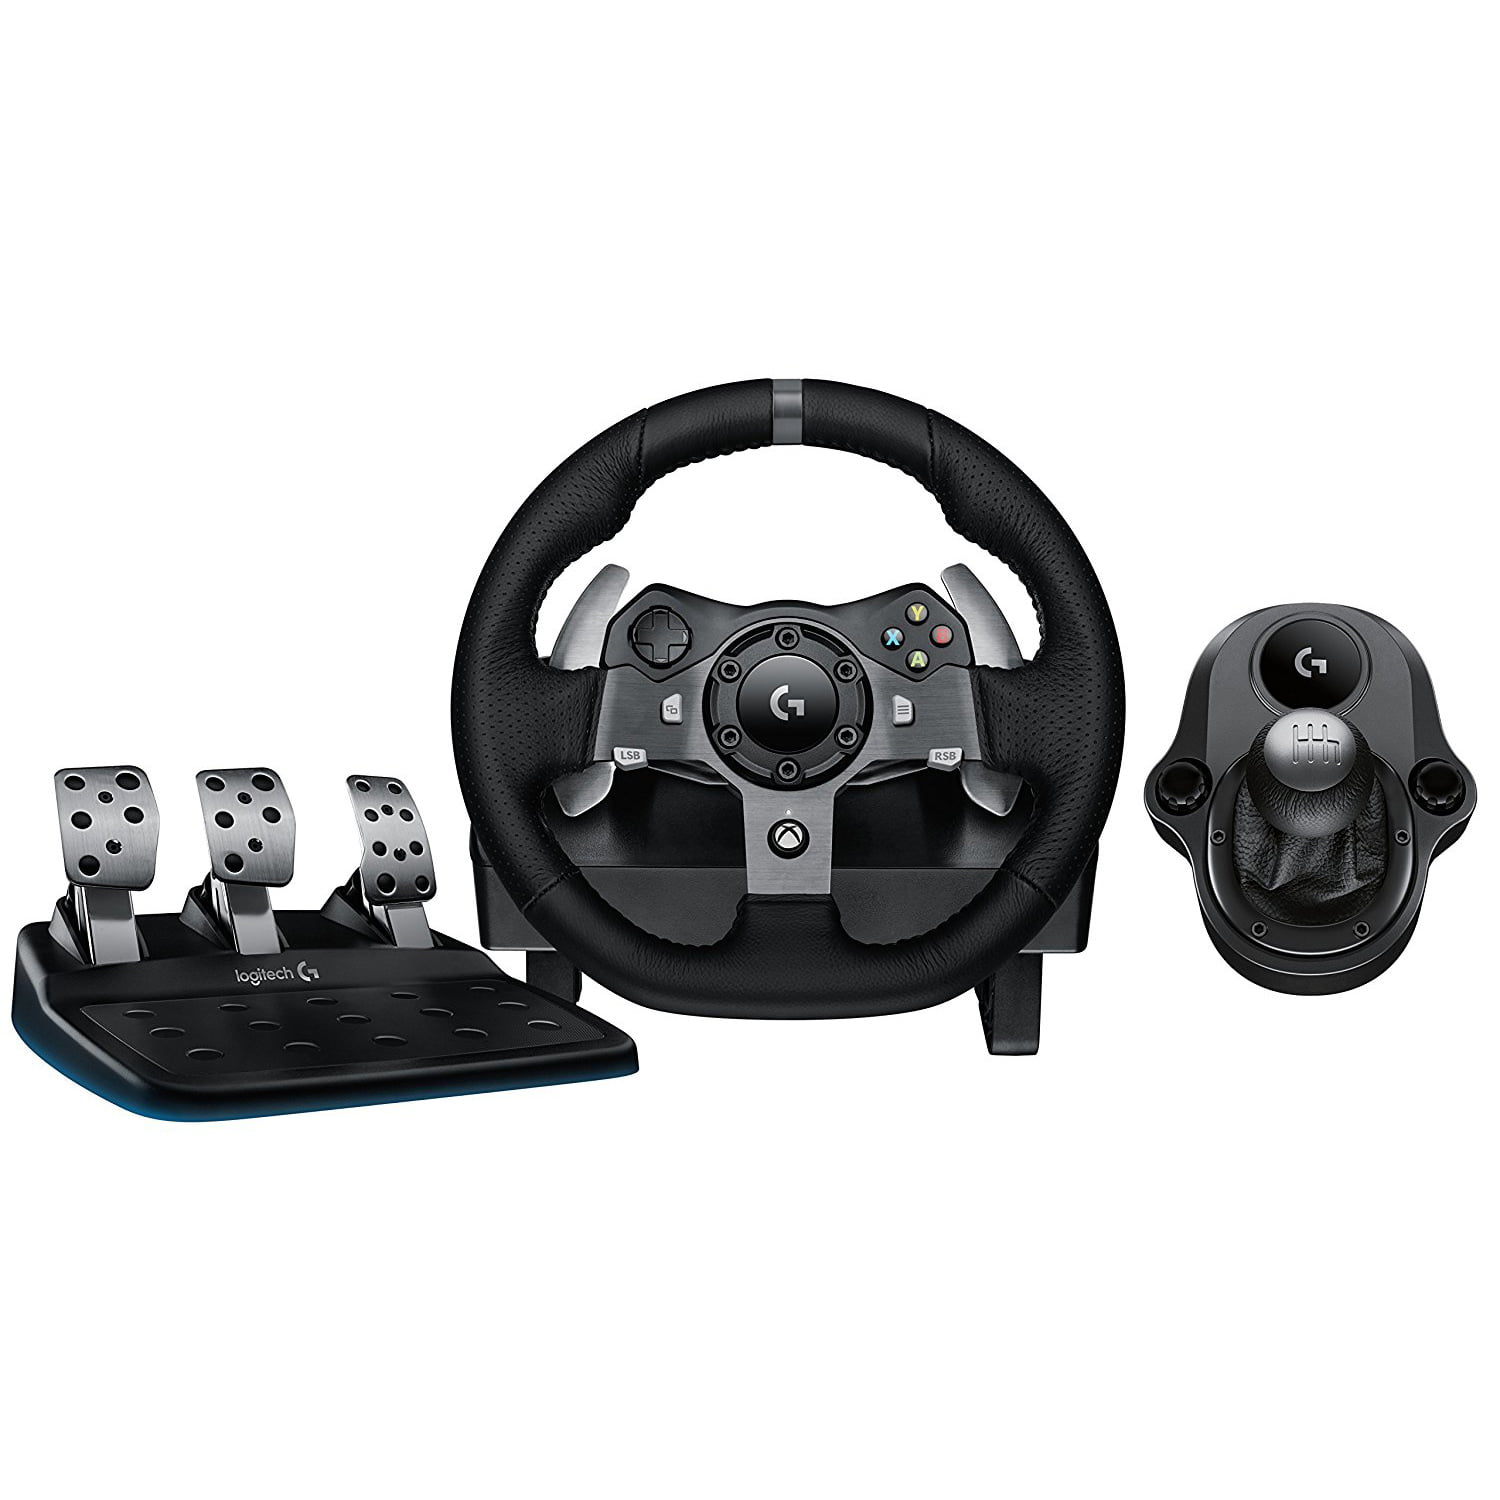 Logitech G920 Driving Force Racing Wheel Dual Motor Force Feedback With Shifter For Pc And Xbox Walmartcom